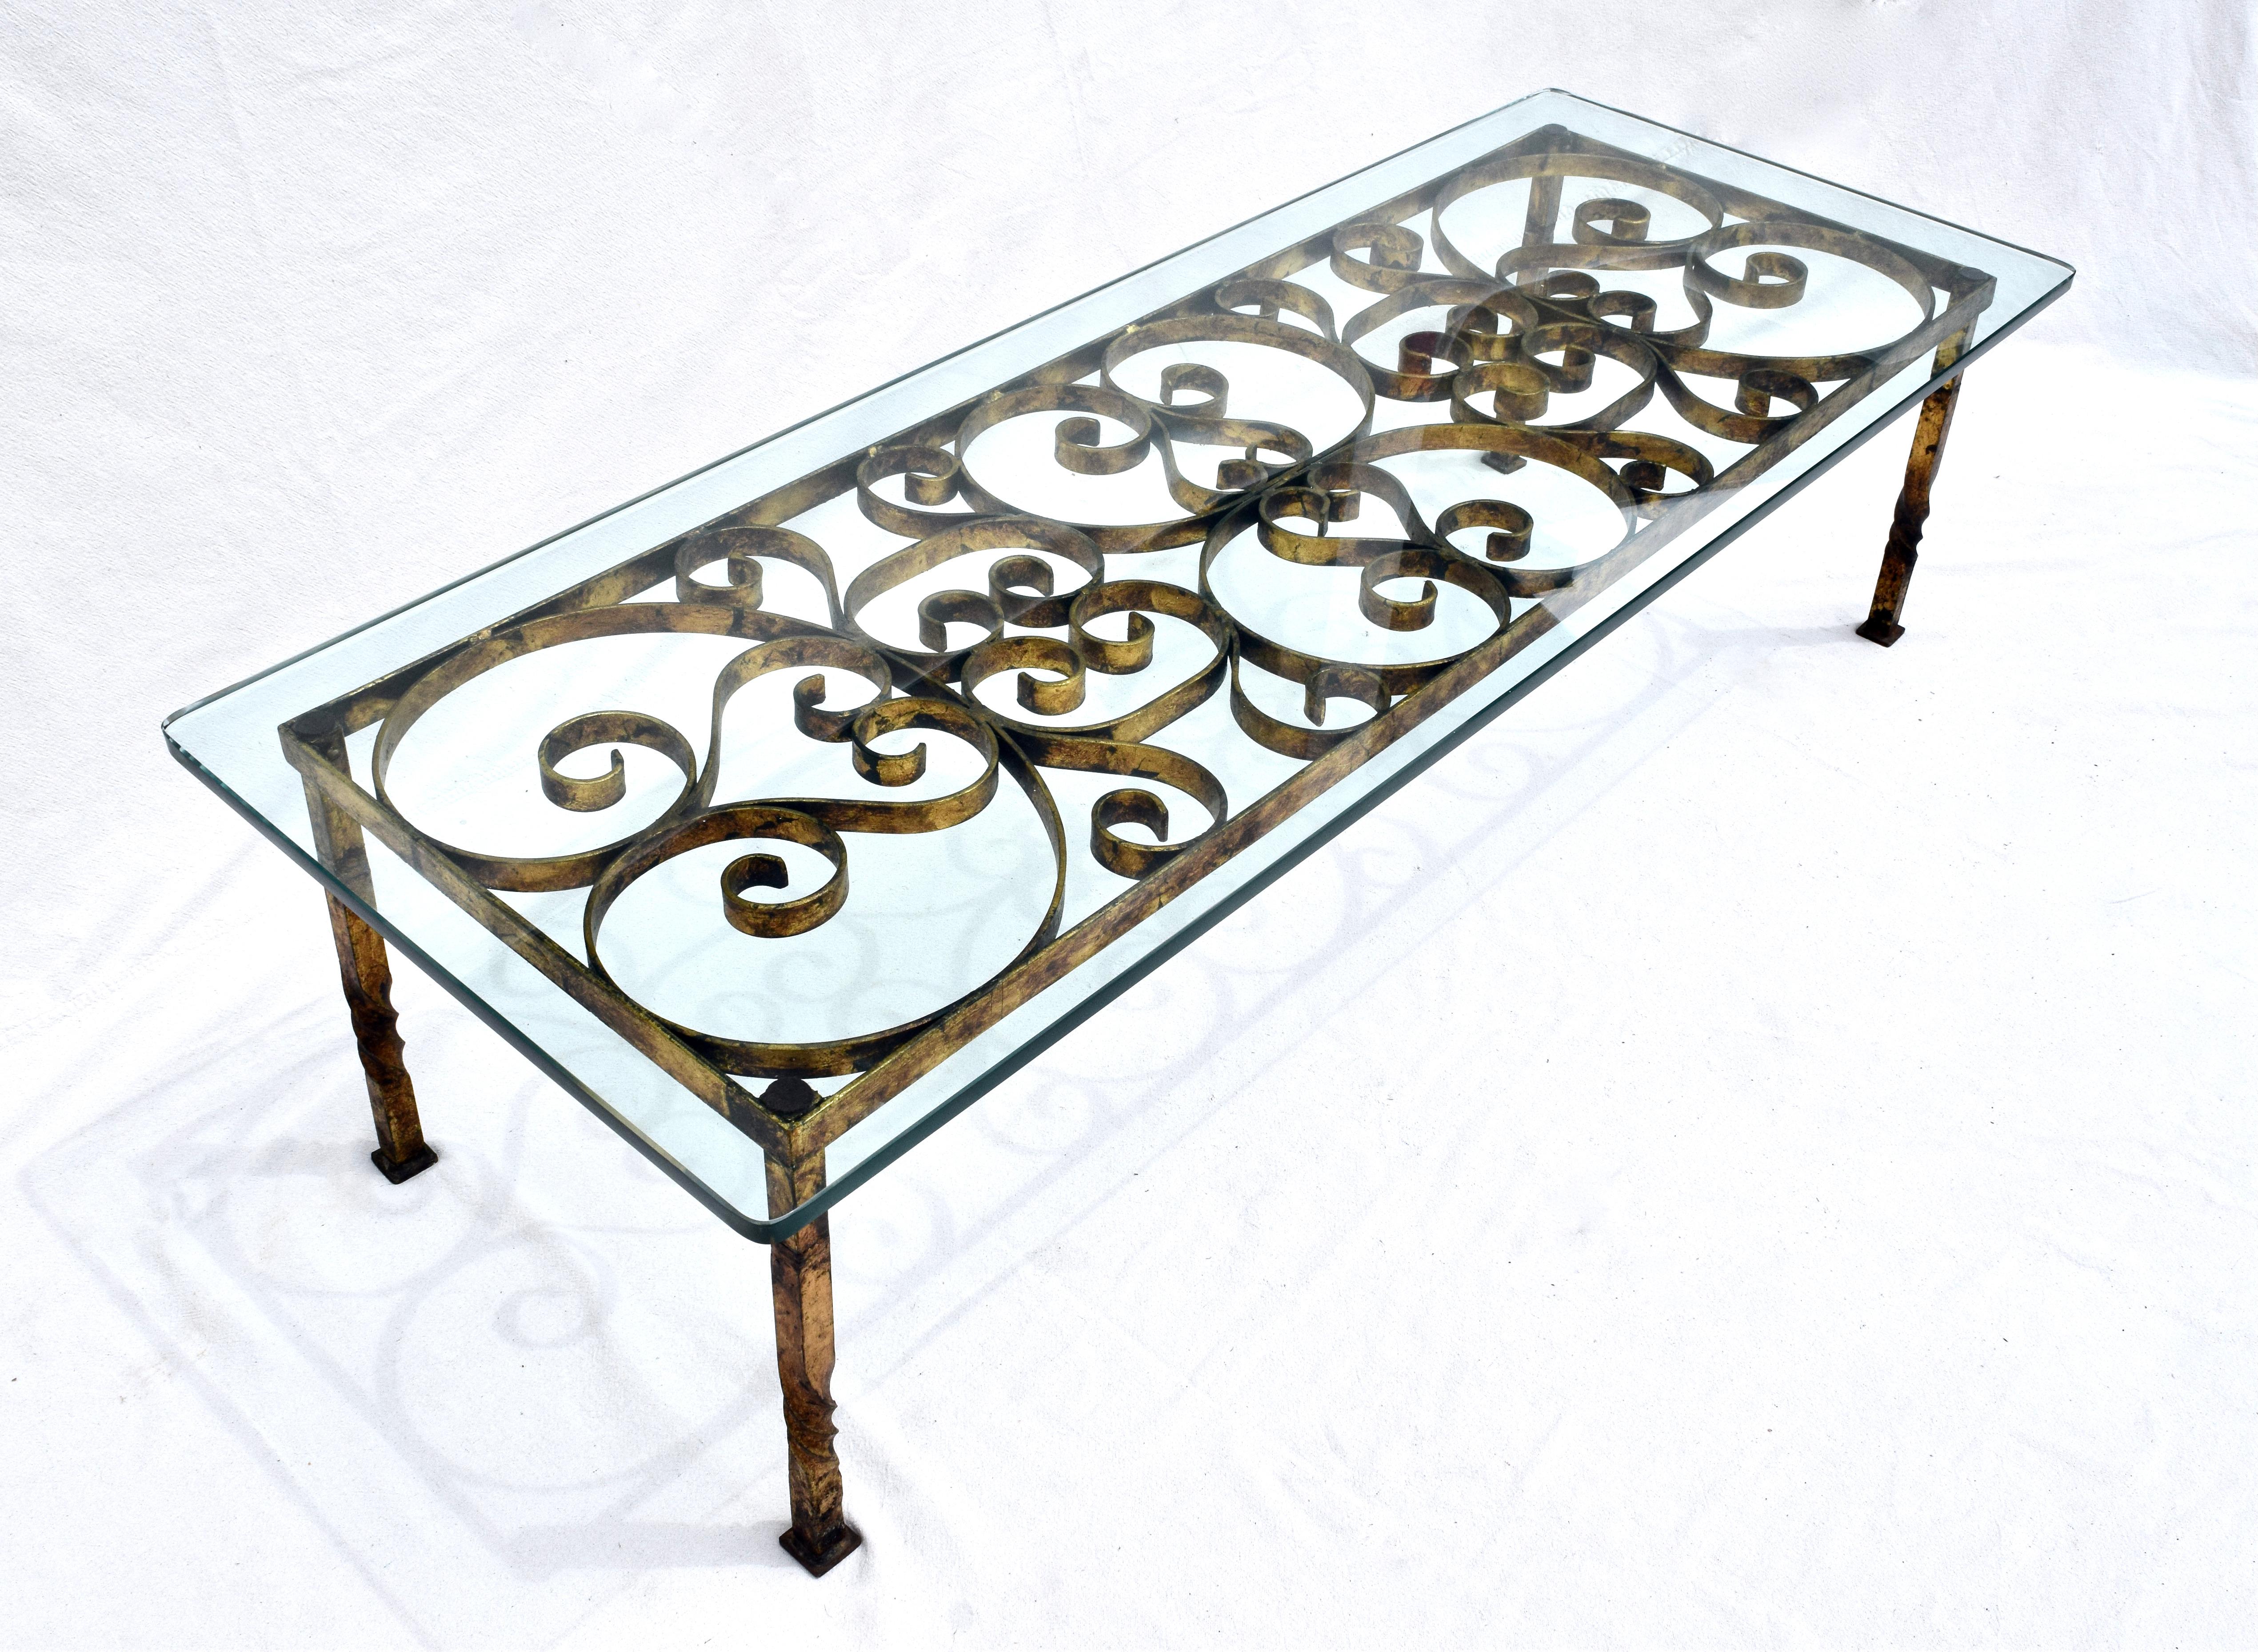 Hand forged iron parcel-gilt cocktail table with original 3/4